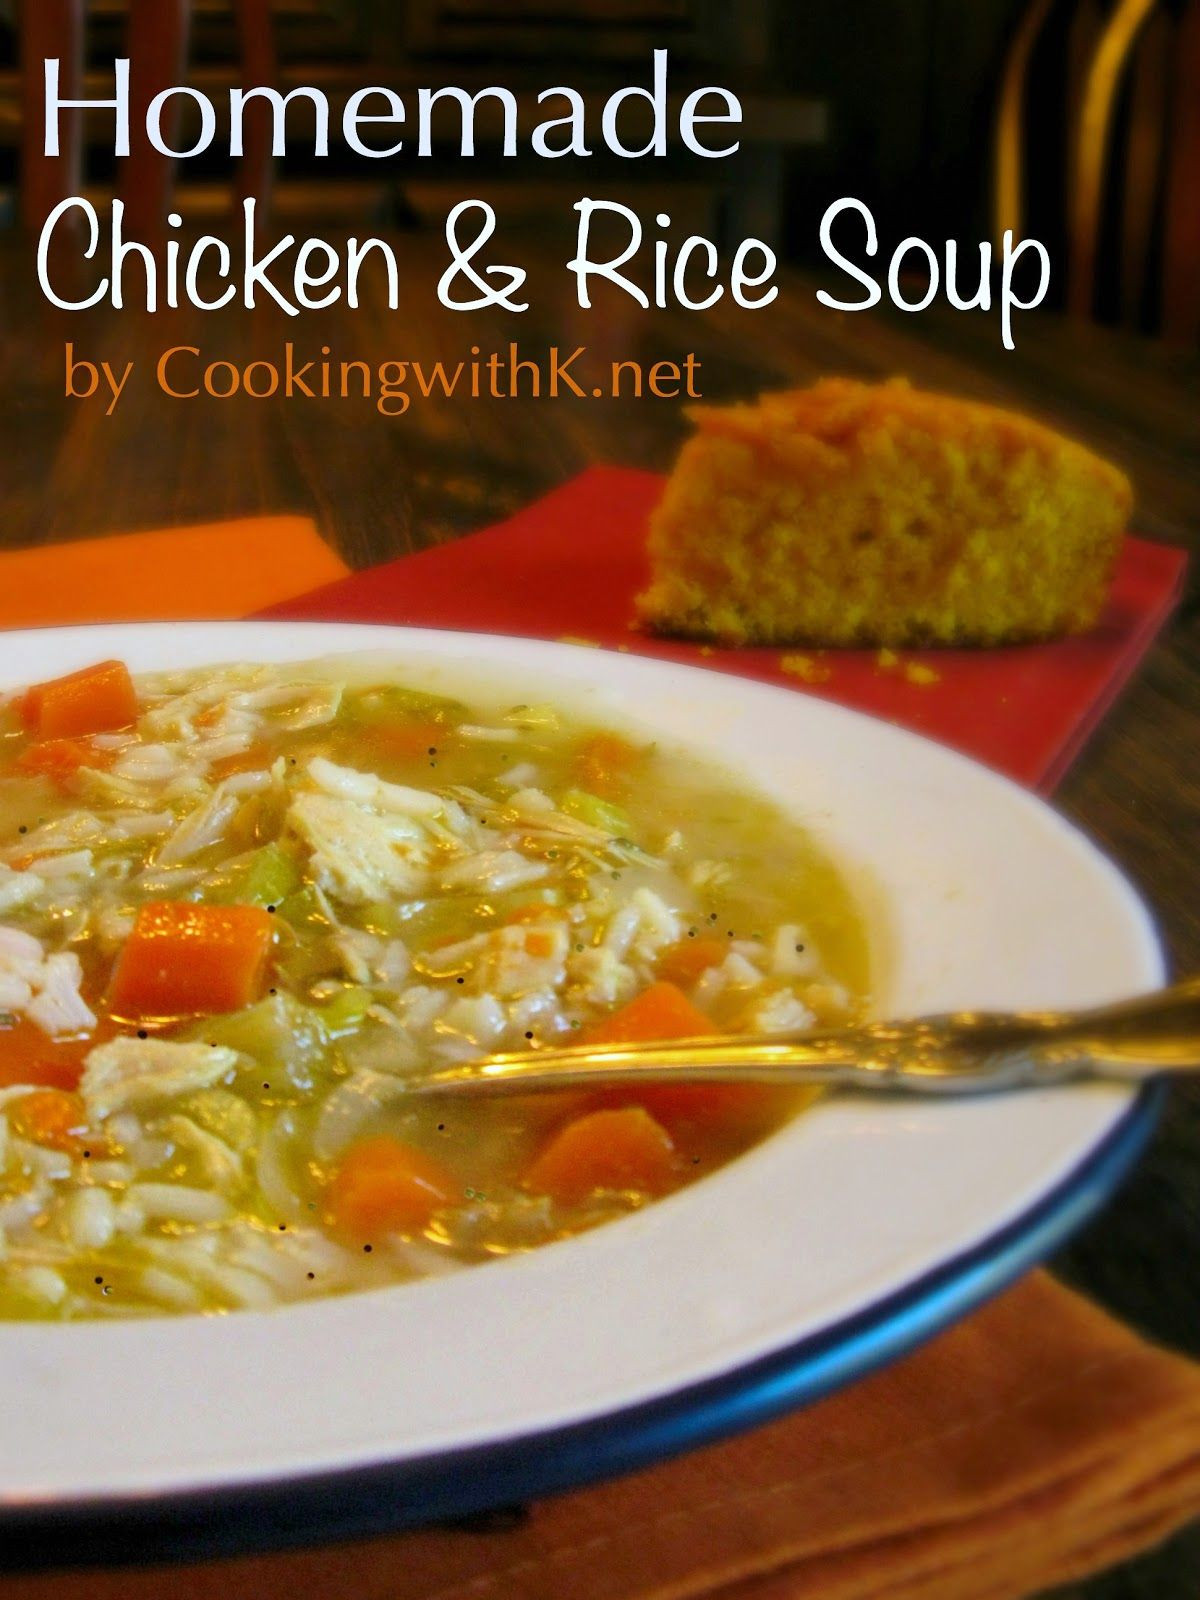 Campbells Soup Chicken And Rice
 This hearty Homemade Chicken & Rice Soup reminds me of the